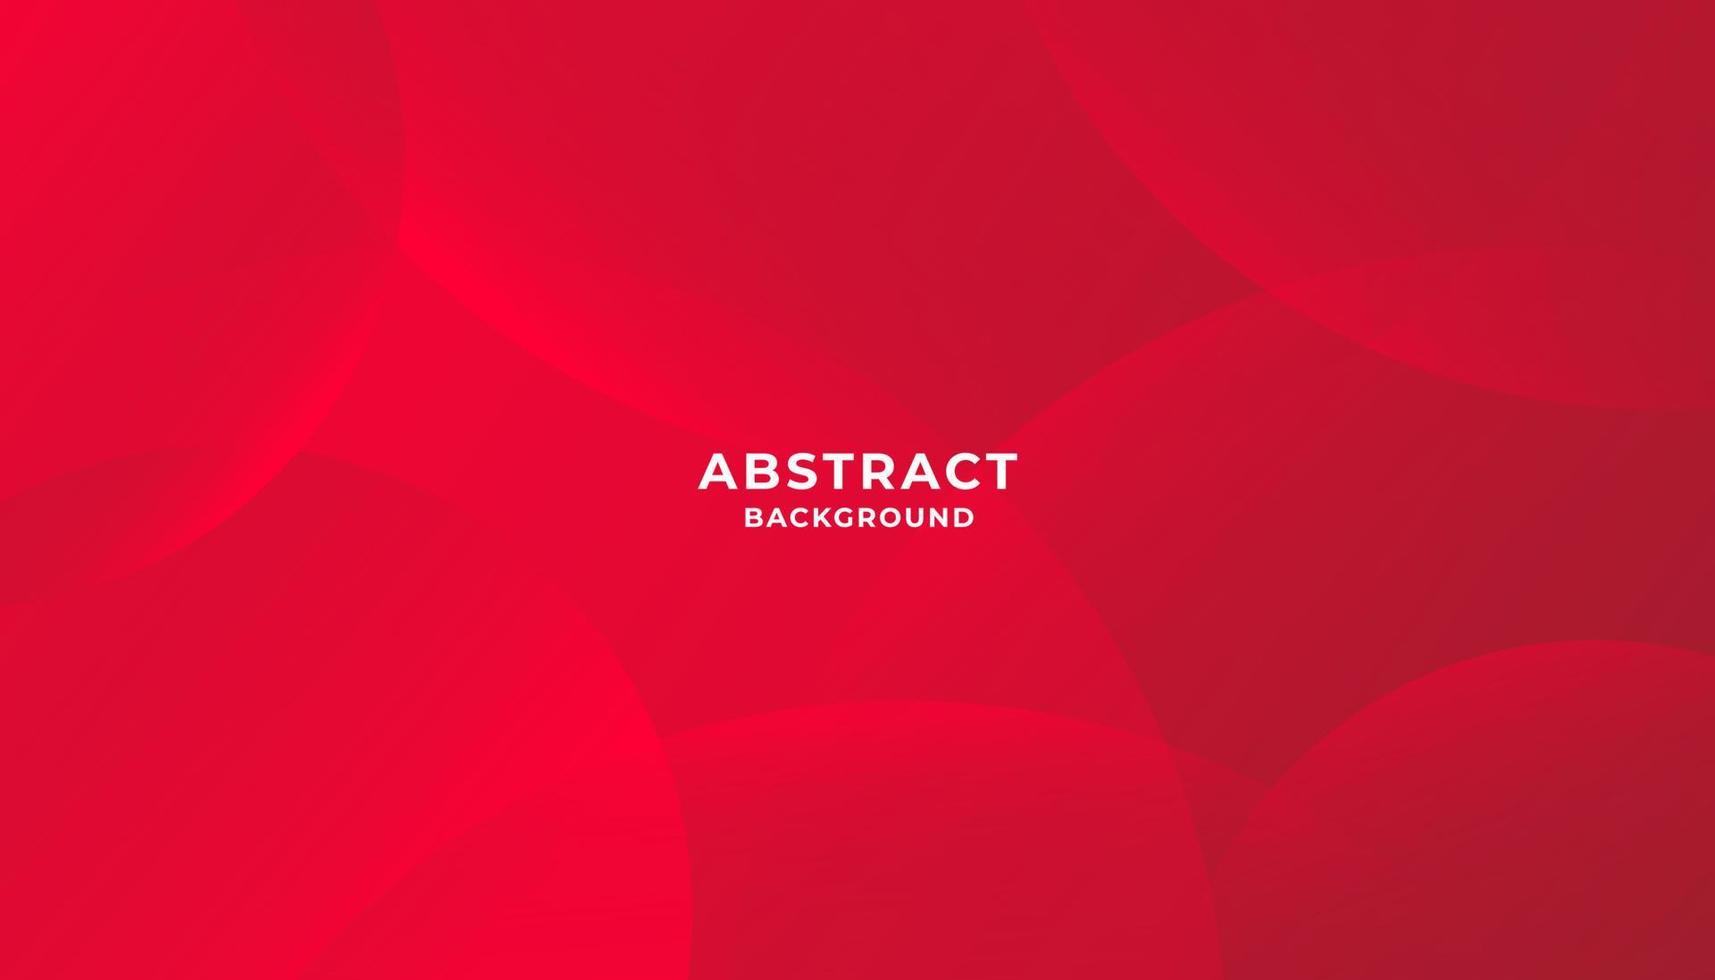 Minimal geometric background. Red elements with fluid gradient. Dynamic shapes composition. Eps10 vector